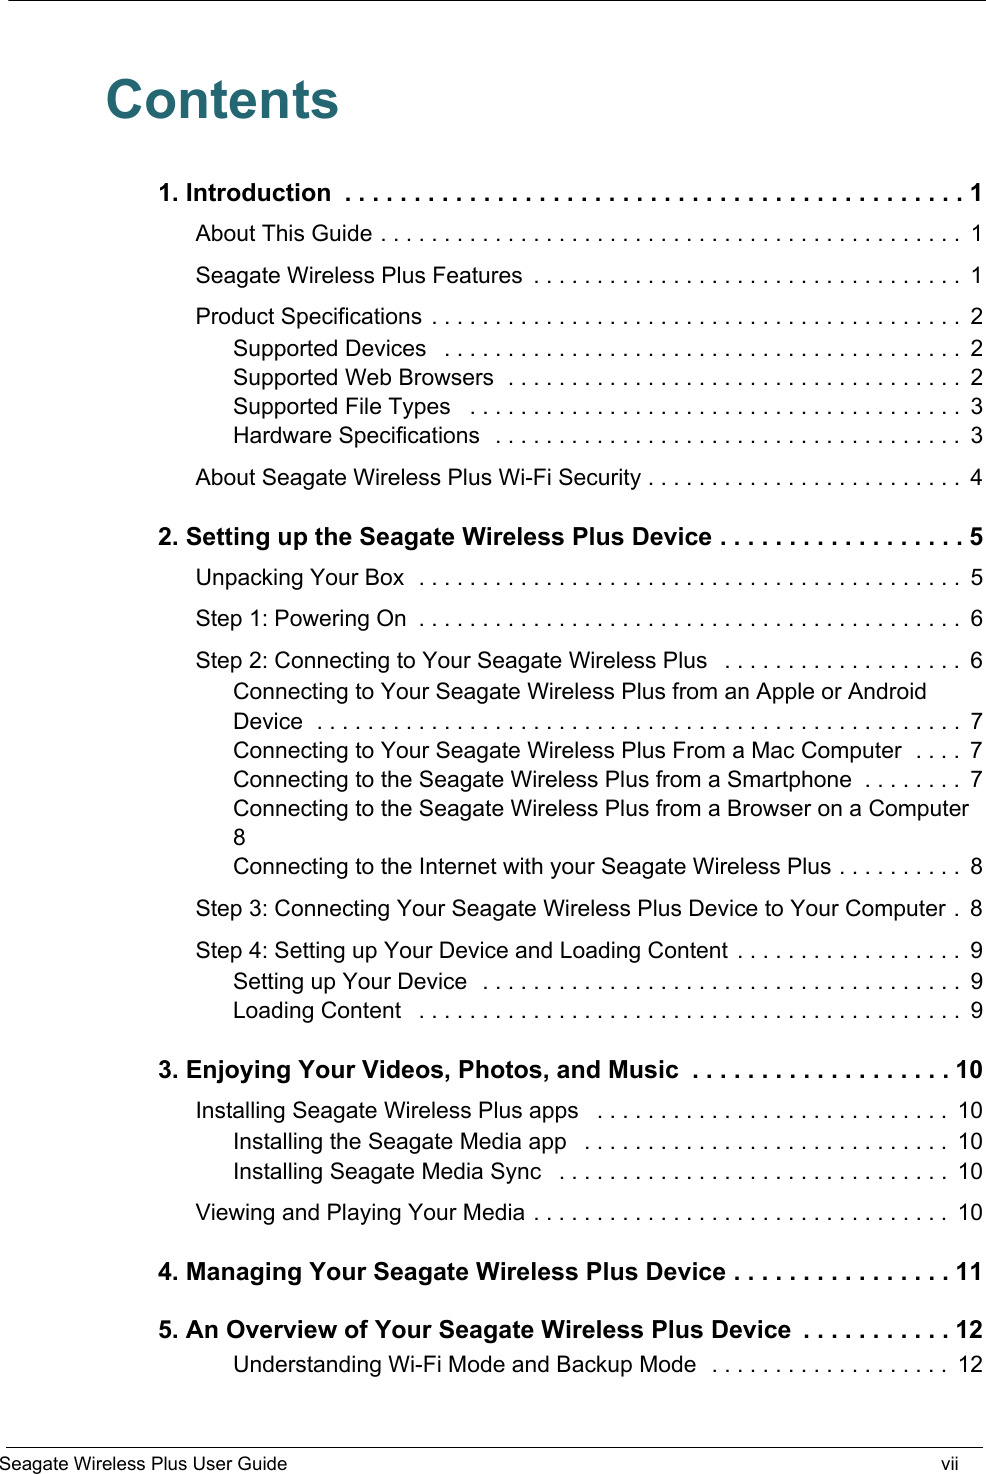    Seagate Wireless Plus User Guide viiContents1. Introduction  . . . . . . . . . . . . . . . . . . . . . . . . . . . . . . . . . . . . . . . . . . . . . 1About This Guide . . . . . . . . . . . . . . . . . . . . . . . . . . . . . . . . . . . . . . . . . . . . . .  1Seagate Wireless Plus Features  . . . . . . . . . . . . . . . . . . . . . . . . . . . . . . . . . .  1Product Specifications  . . . . . . . . . . . . . . . . . . . . . . . . . . . . . . . . . . . . . . . . . .  2Supported Devices   . . . . . . . . . . . . . . . . . . . . . . . . . . . . . . . . . . . . . . . . .  2Supported Web Browsers  . . . . . . . . . . . . . . . . . . . . . . . . . . . . . . . . . . . .  2Supported File Types   . . . . . . . . . . . . . . . . . . . . . . . . . . . . . . . . . . . . . . .  3Hardware Specifications  . . . . . . . . . . . . . . . . . . . . . . . . . . . . . . . . . . . . .  3About Seagate Wireless Plus Wi-Fi Security . . . . . . . . . . . . . . . . . . . . . . . . .  42. Setting up the Seagate Wireless Plus Device . . . . . . . . . . . . . . . . . . 5Unpacking Your Box  . . . . . . . . . . . . . . . . . . . . . . . . . . . . . . . . . . . . . . . . . . .  5Step 1: Powering On  . . . . . . . . . . . . . . . . . . . . . . . . . . . . . . . . . . . . . . . . . . .  6Step 2: Connecting to Your Seagate Wireless Plus   . . . . . . . . . . . . . . . . . . .  6Connecting to Your Seagate Wireless Plus from an Apple or Android Device  . . . . . . . . . . . . . . . . . . . . . . . . . . . . . . . . . . . . . . . . . . . . . . . . . . .  7Connecting to Your Seagate Wireless Plus From a Mac Computer  . . . .  7Connecting to the Seagate Wireless Plus from a Smartphone  . . . . . . . .  7Connecting to the Seagate Wireless Plus from a Browser on a Computer 8Connecting to the Internet with your Seagate Wireless Plus . . . . . . . . . .  8Step 3: Connecting Your Seagate Wireless Plus Device to Your Computer .  8Step 4: Setting up Your Device and Loading Content  . . . . . . . . . . . . . . . . . .  9Setting up Your Device  . . . . . . . . . . . . . . . . . . . . . . . . . . . . . . . . . . . . . .  9Loading Content   . . . . . . . . . . . . . . . . . . . . . . . . . . . . . . . . . . . . . . . . . . .  93. Enjoying Your Videos, Photos, and Music  . . . . . . . . . . . . . . . . . . . 10Installing Seagate Wireless Plus apps   . . . . . . . . . . . . . . . . . . . . . . . . . . . .  10Installing the Seagate Media app   . . . . . . . . . . . . . . . . . . . . . . . . . . . . .  10Installing Seagate Media Sync   . . . . . . . . . . . . . . . . . . . . . . . . . . . . . . .  10Viewing and Playing Your Media . . . . . . . . . . . . . . . . . . . . . . . . . . . . . . . . .  104. Managing Your Seagate Wireless Plus Device . . . . . . . . . . . . . . . . 115. An Overview of Your Seagate Wireless Plus Device  . . . . . . . . . . . 12Understanding Wi-Fi Mode and Backup Mode  . . . . . . . . . . . . . . . . . . .  12